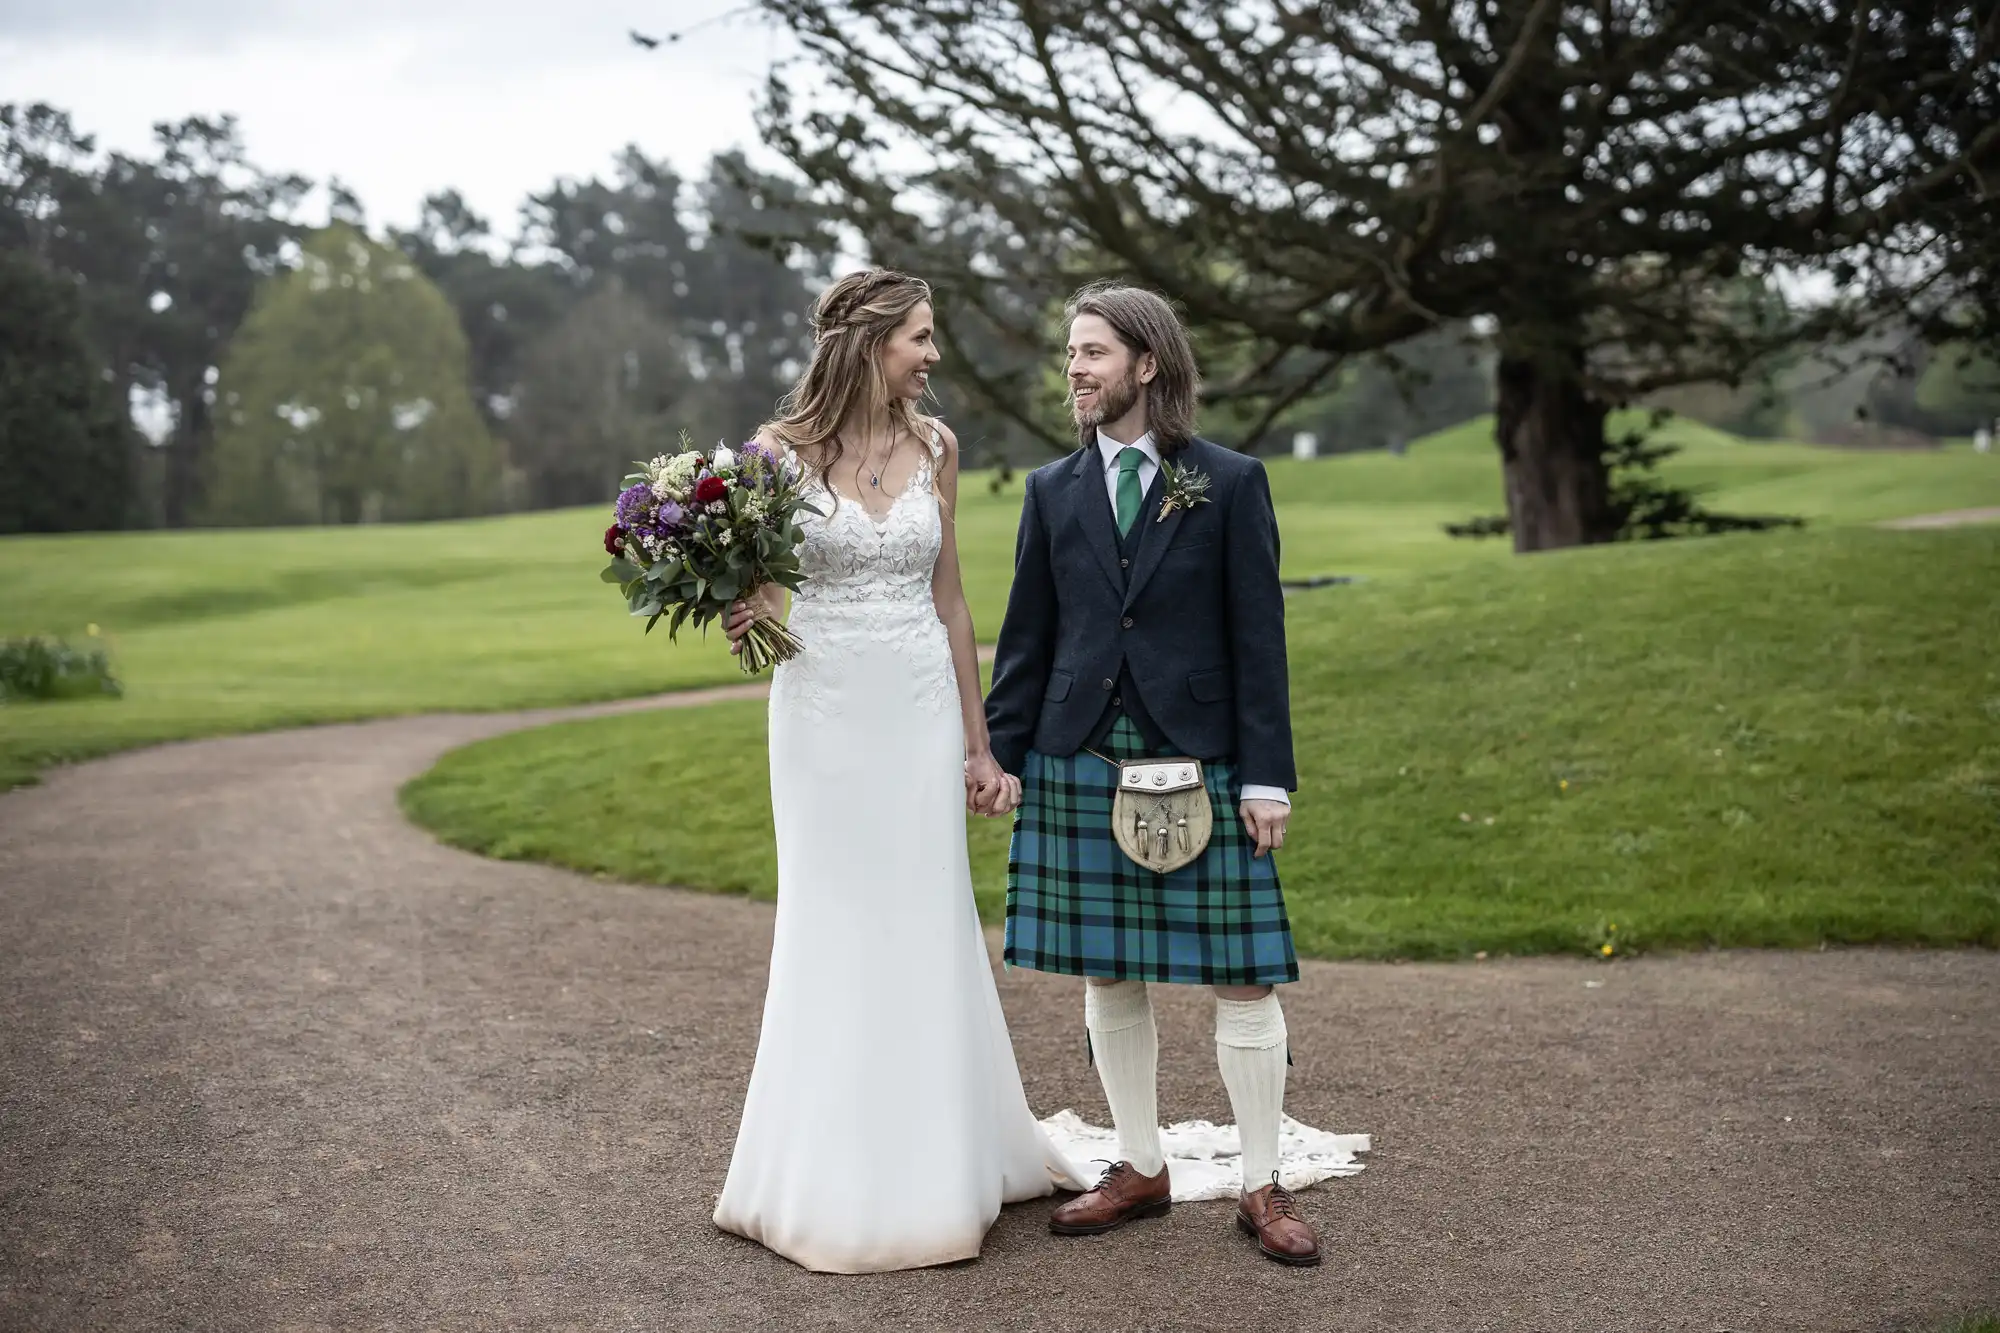 A bride in a white dress and a groom dressed in traditional Scottish attire hold hands and smile at each other, standing on a path in a green, park-like setting.